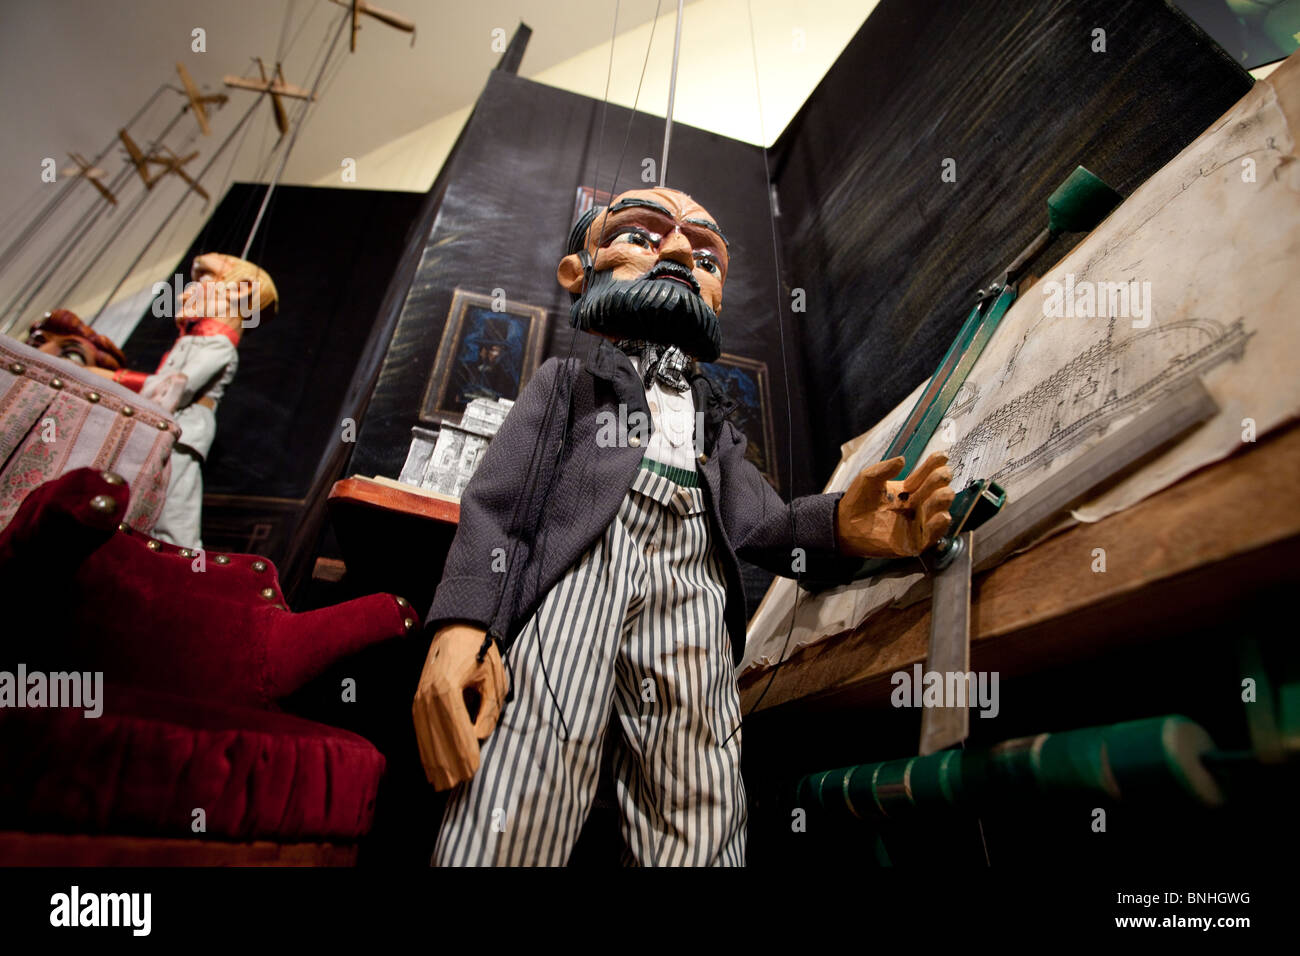 Marionette puppet displayed at the museum of Puppets which aims to promote puppetry as a communicative art form located in the city of Holon Israel Stock Photo